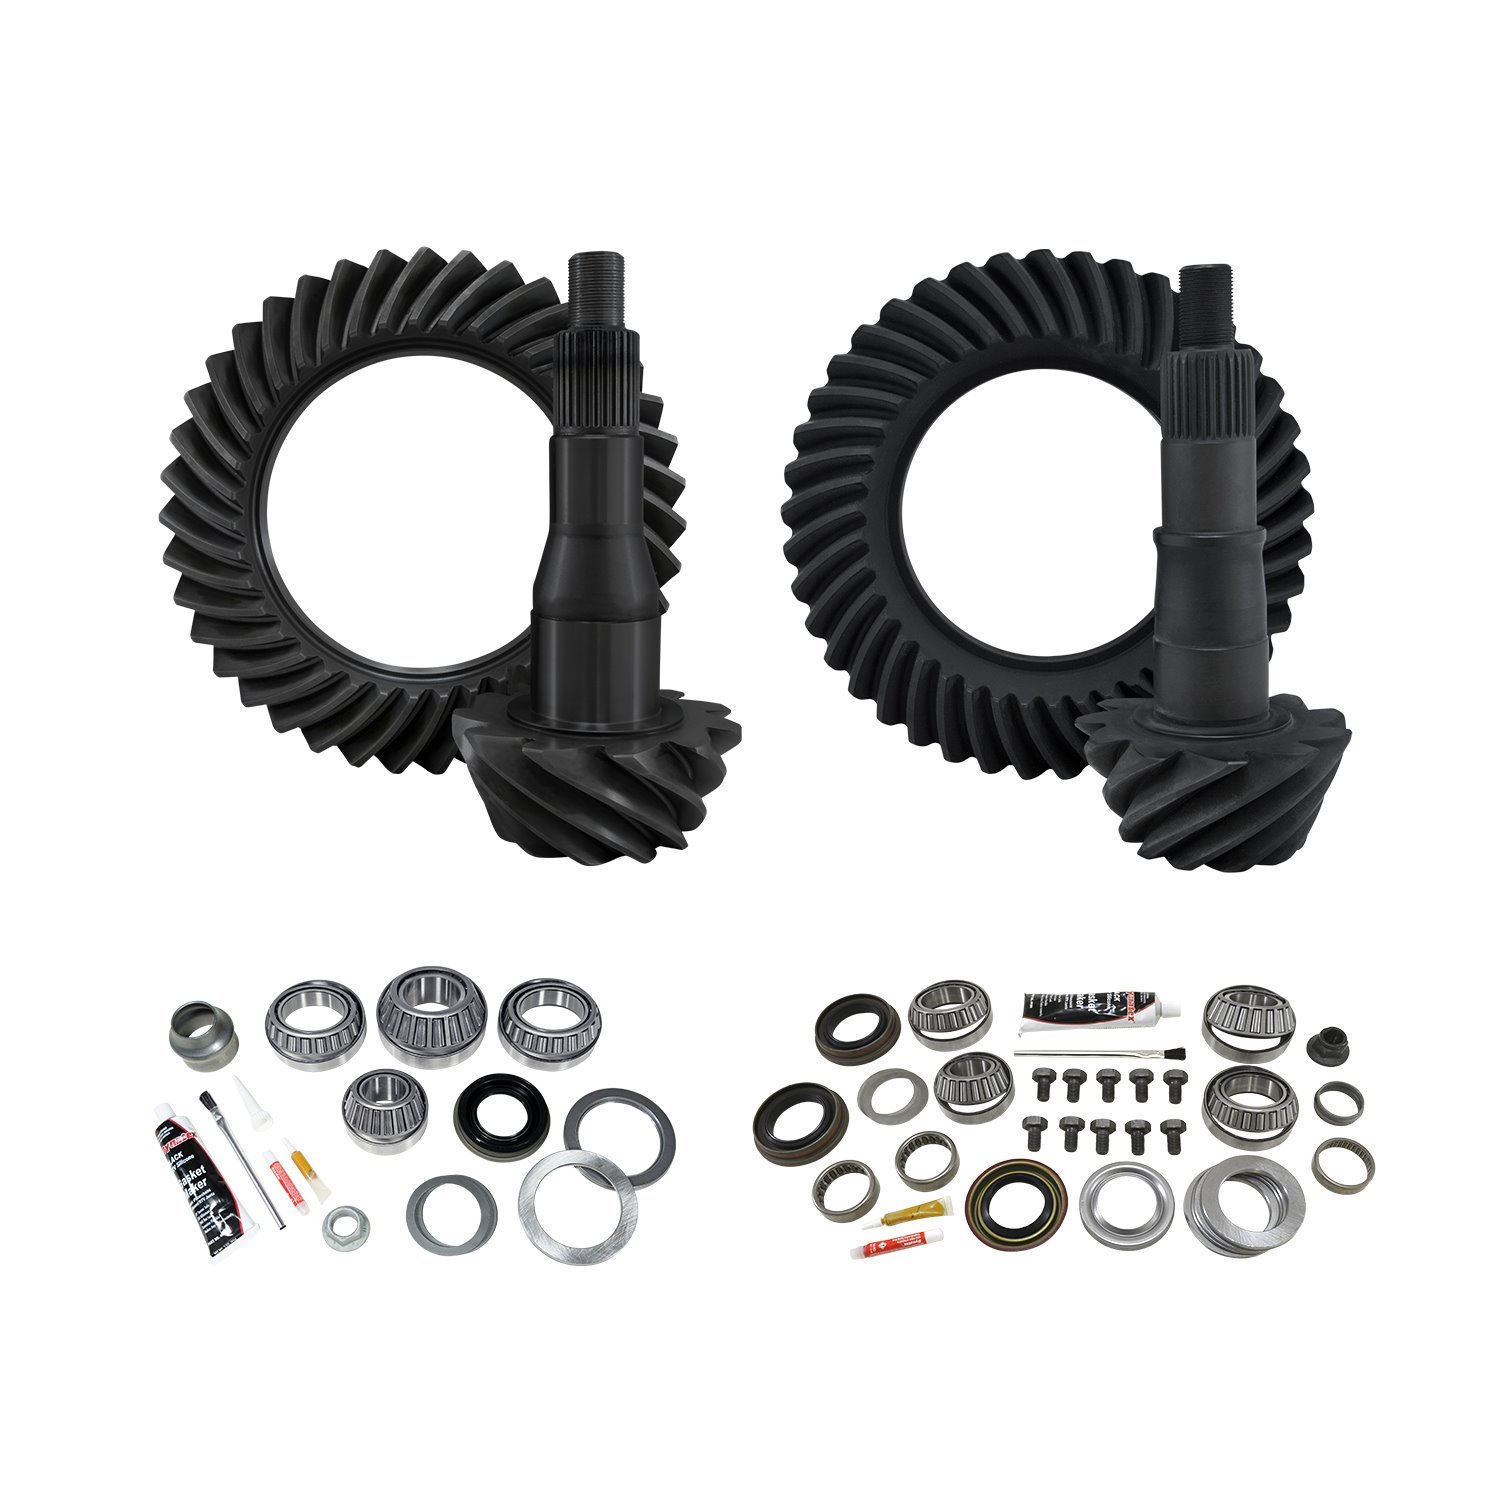 Re-Gear & Installation Kit, Ford 9.75 in., Various F150, 5.13 Ratio, Fr&Rr